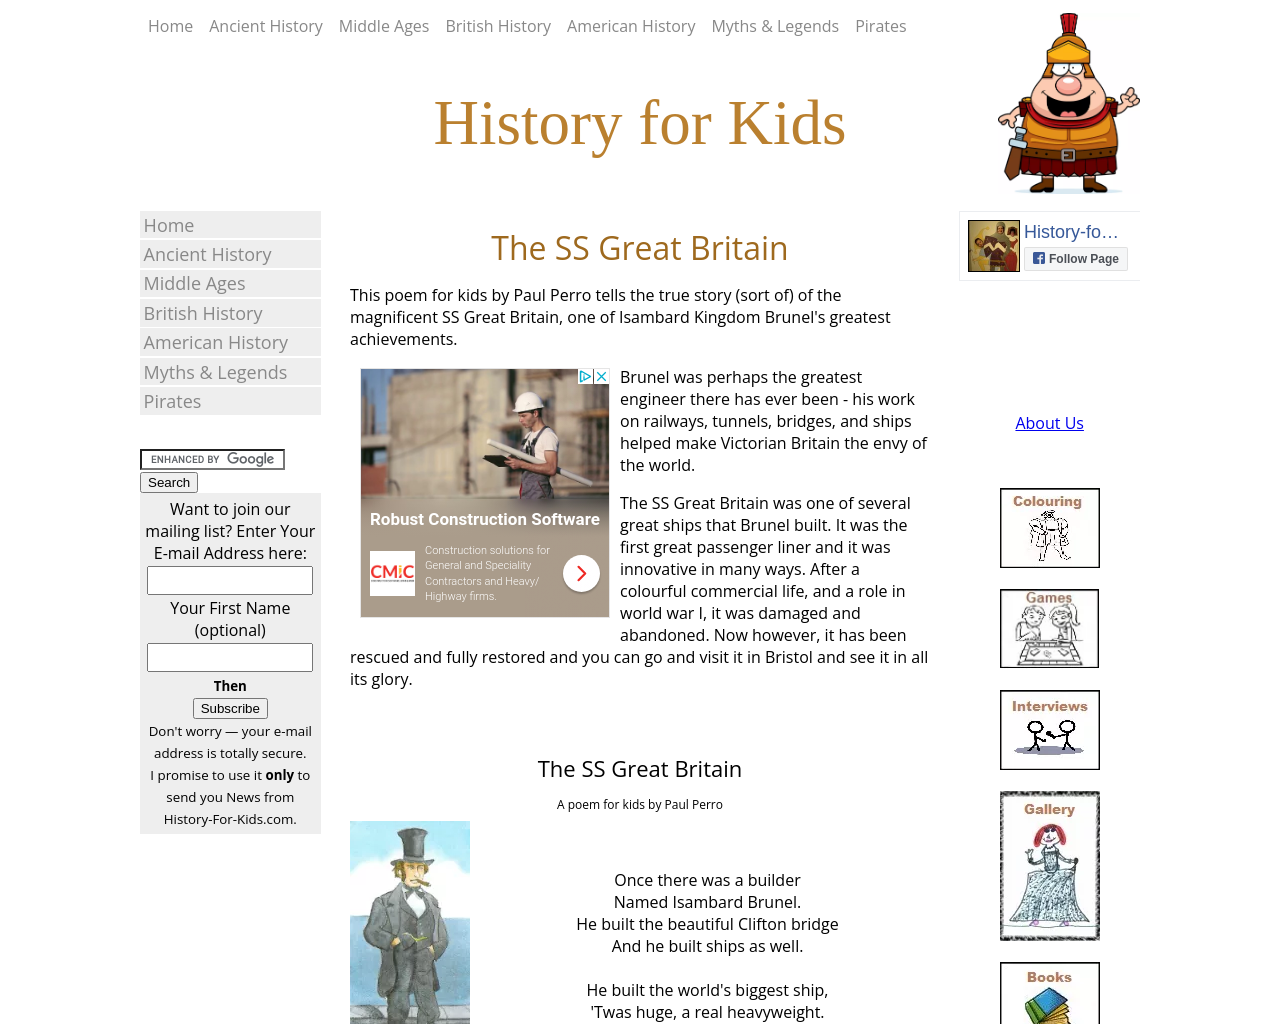 SS Great Britian (Built by Bunnel) (history for kids)